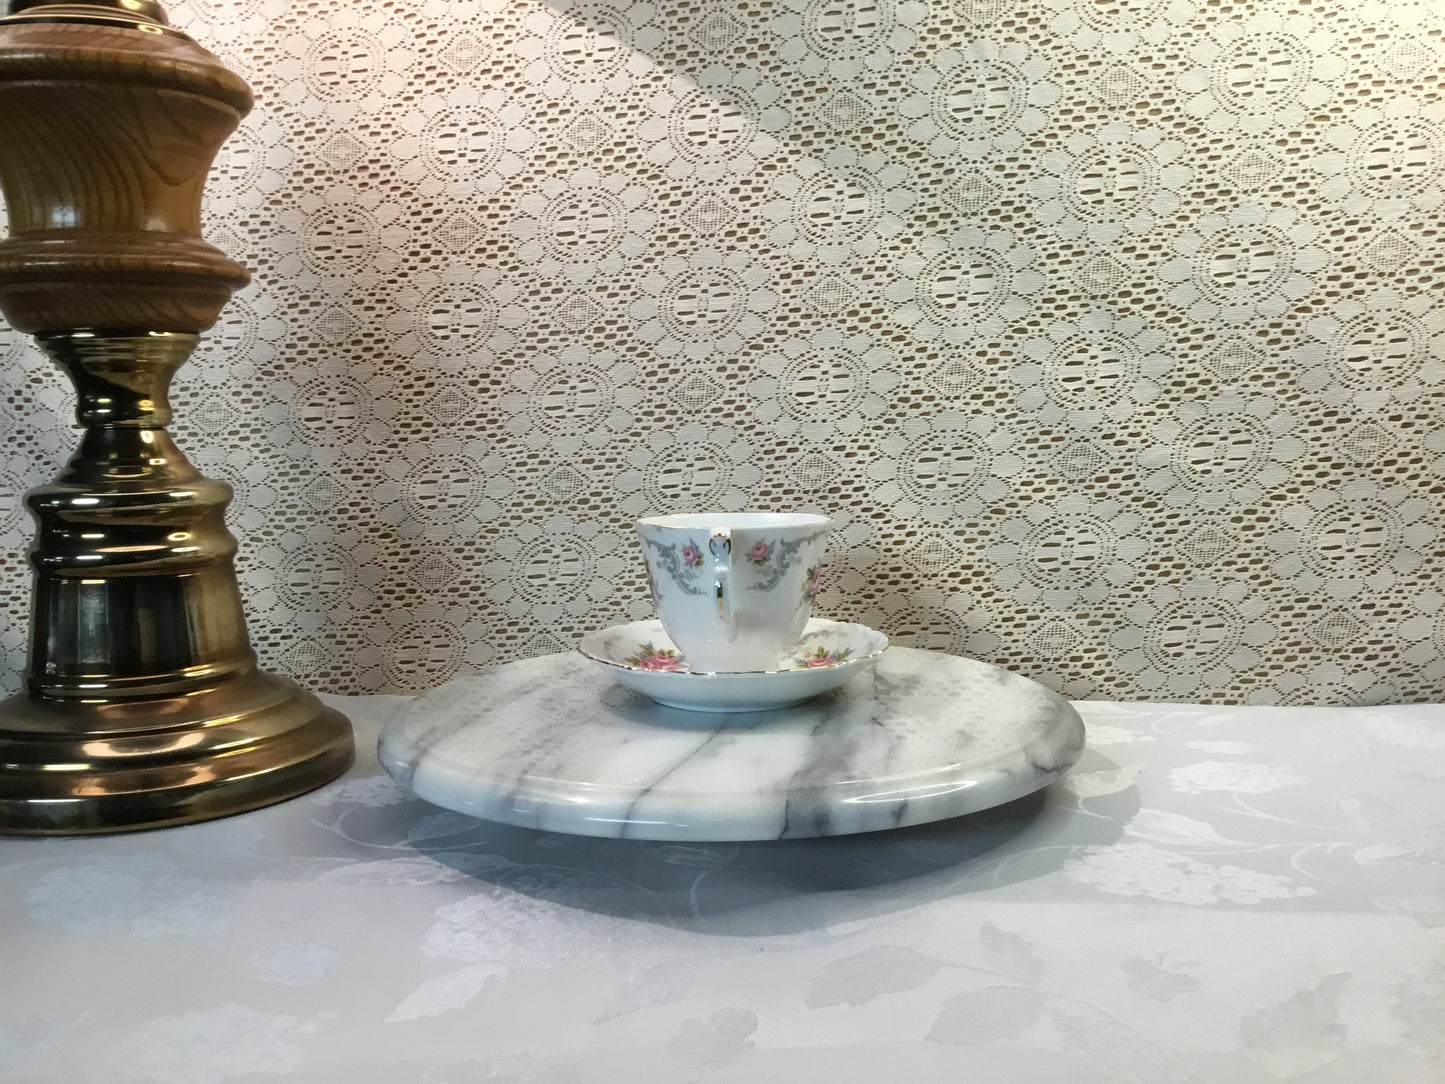 Royal Albert "Tranquility" Cup and Saucer